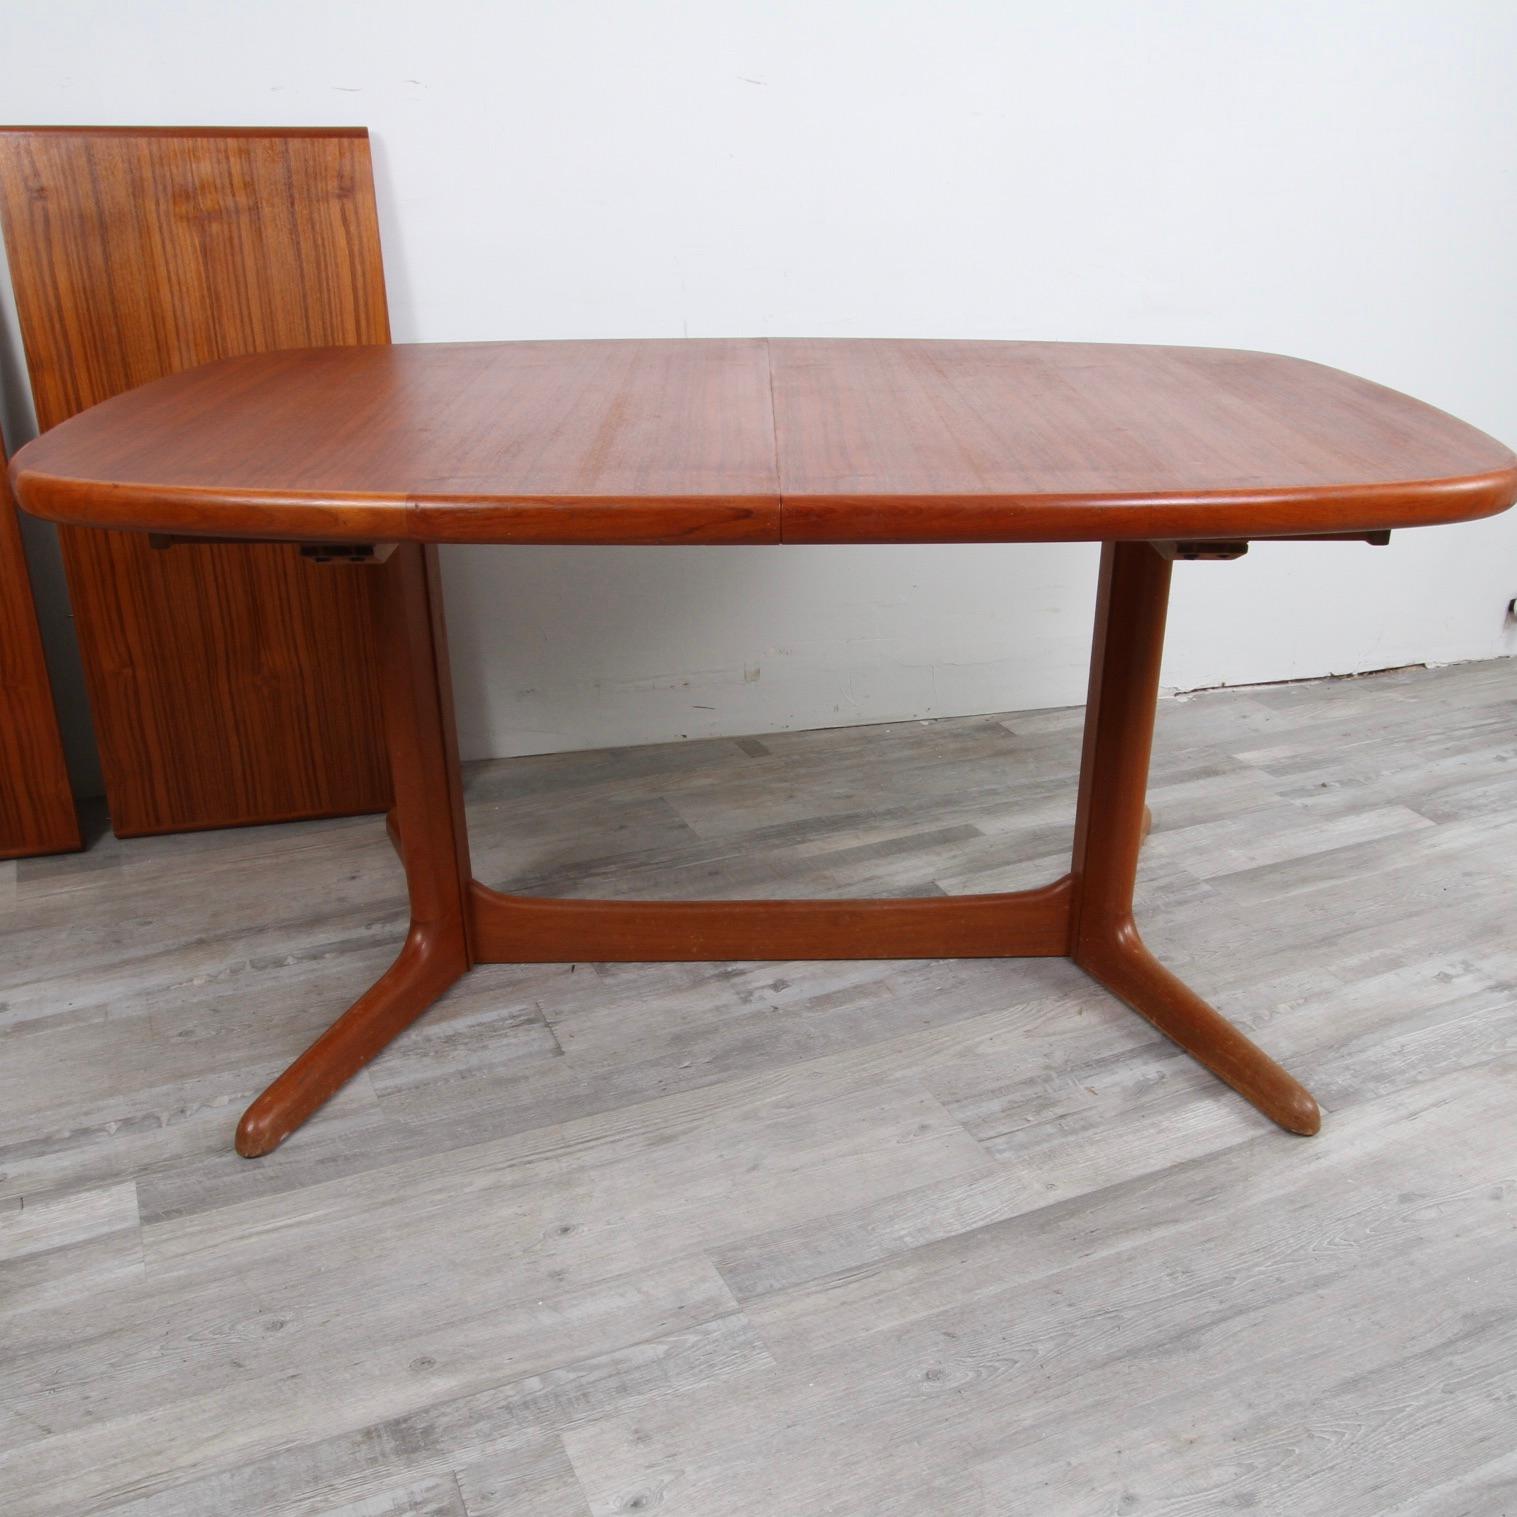  Danish Teak Oval Dining Table from Rasmus Solberg, 1960s In Good Condition For Sale In New London, CT